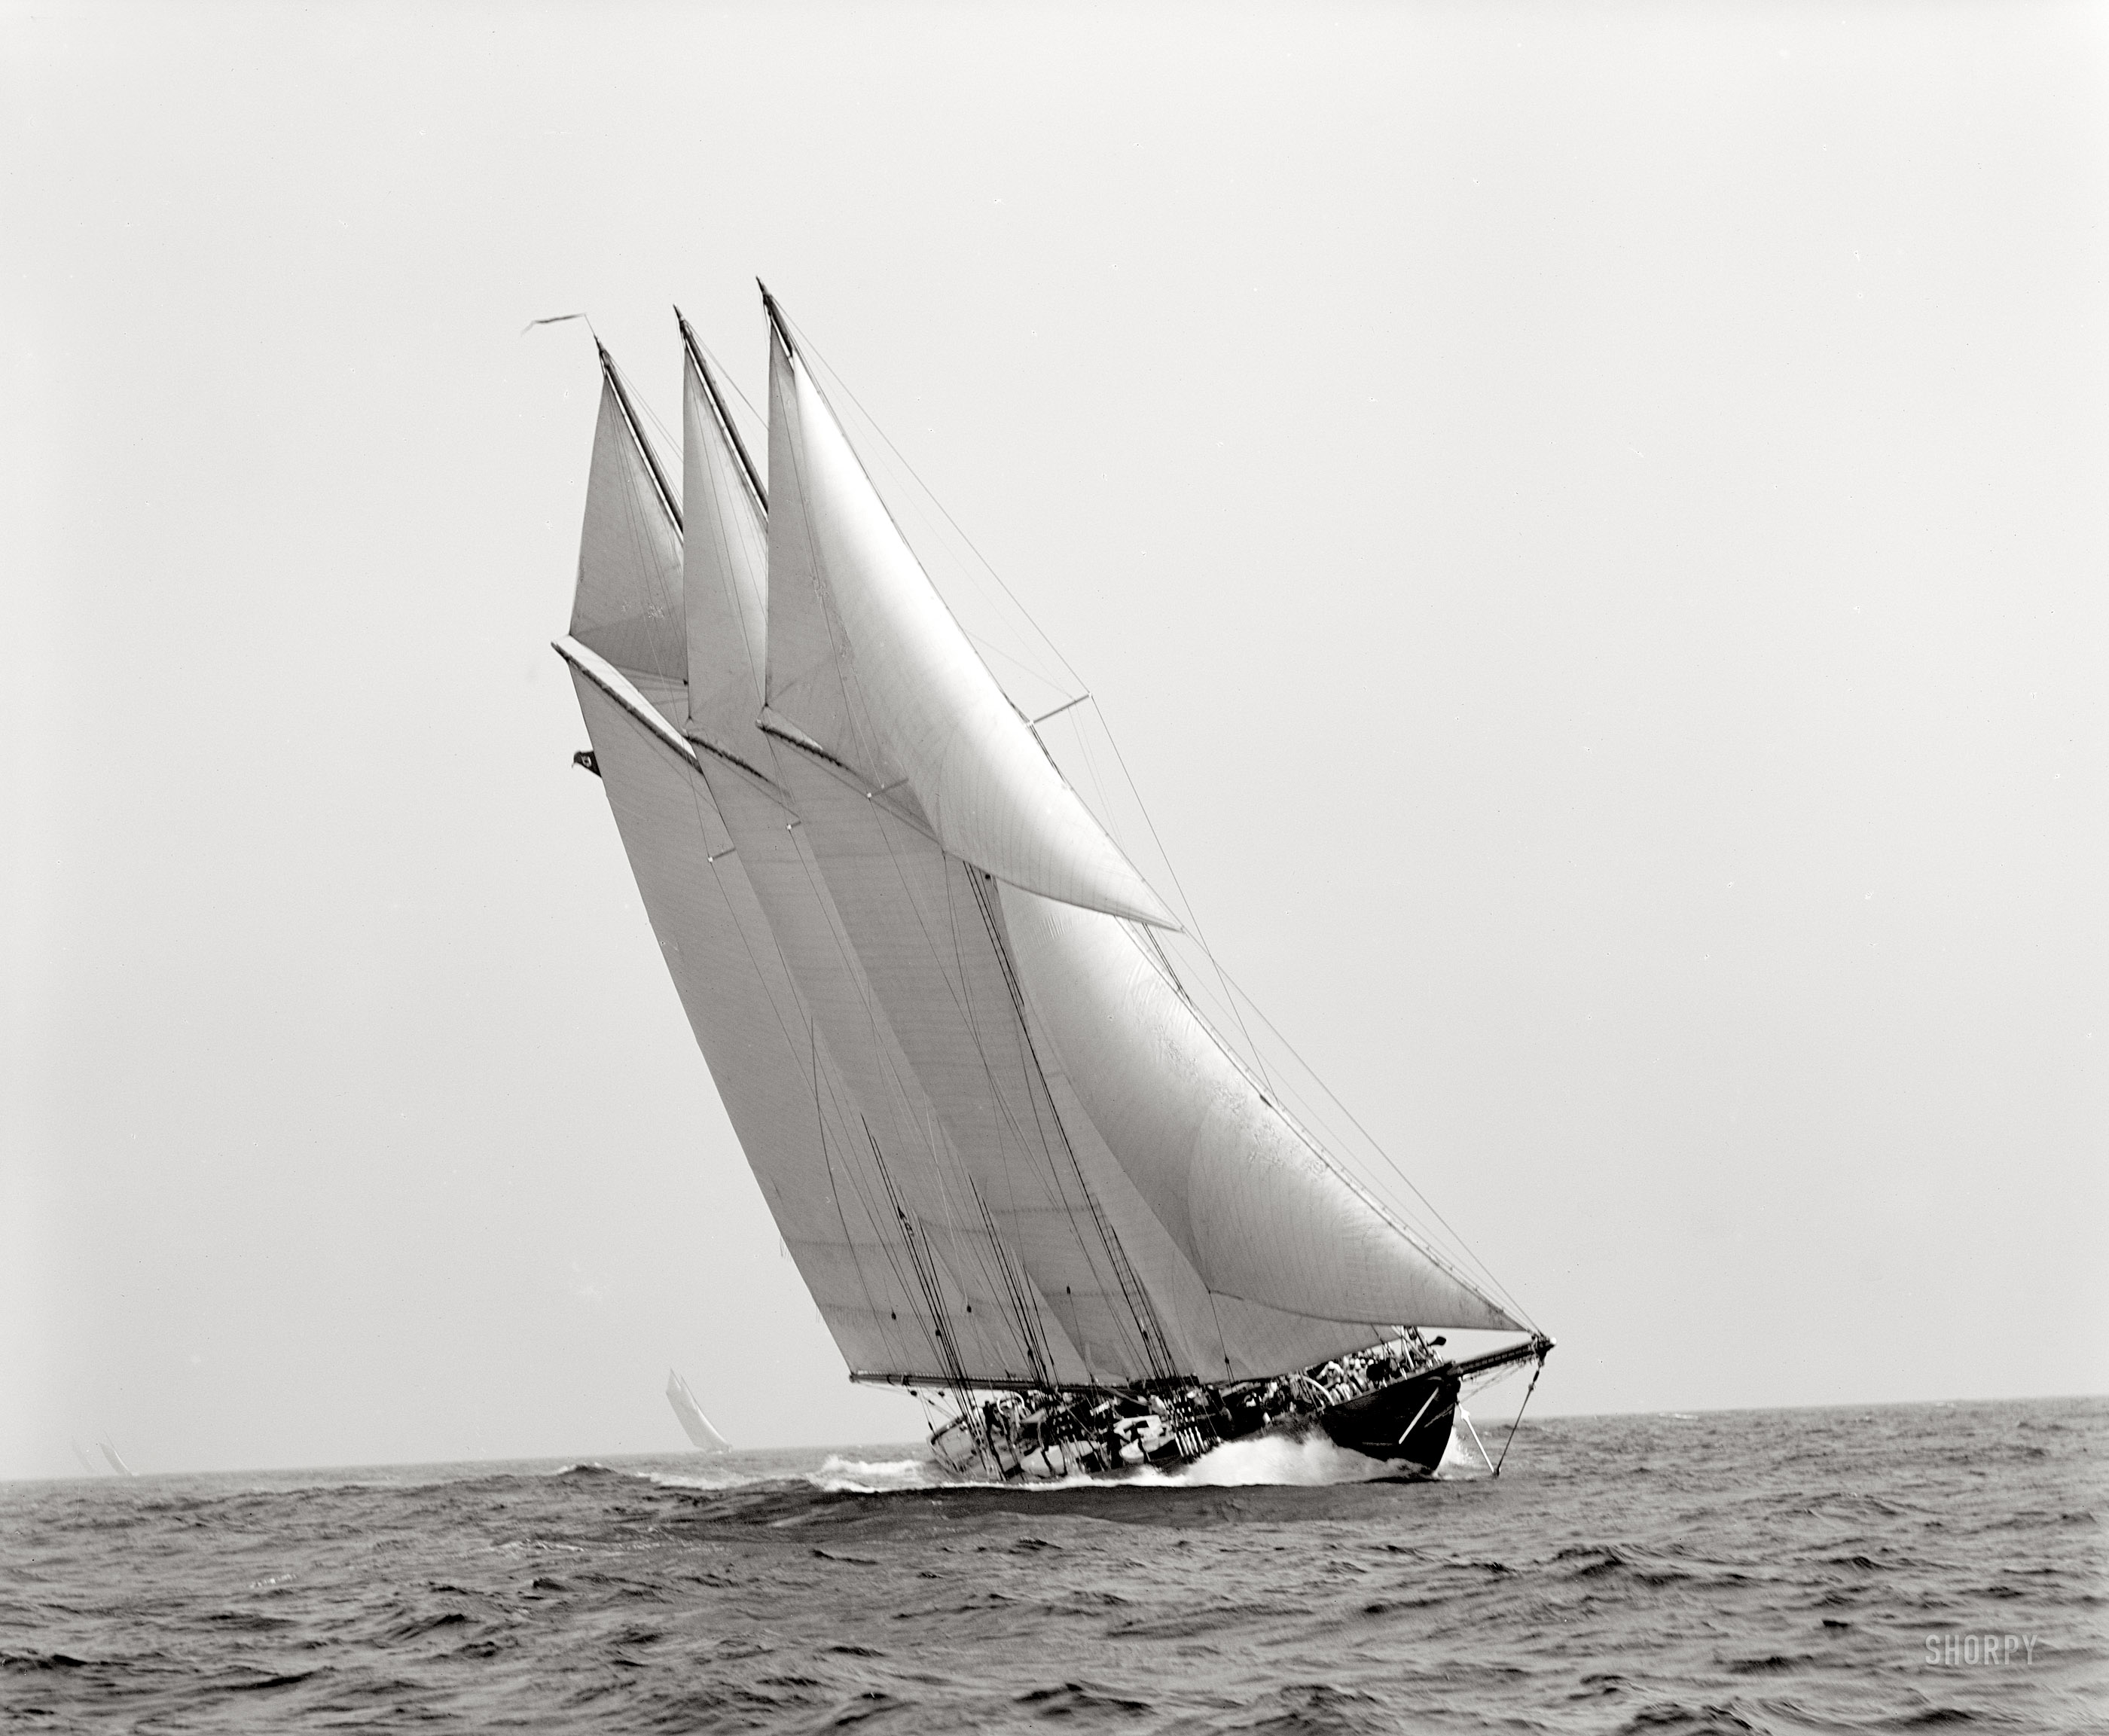 August 17, 1904. "Atlantic at sail." 8x10 inch dry plate glass negative, Detroit Publishing Company. View full size.